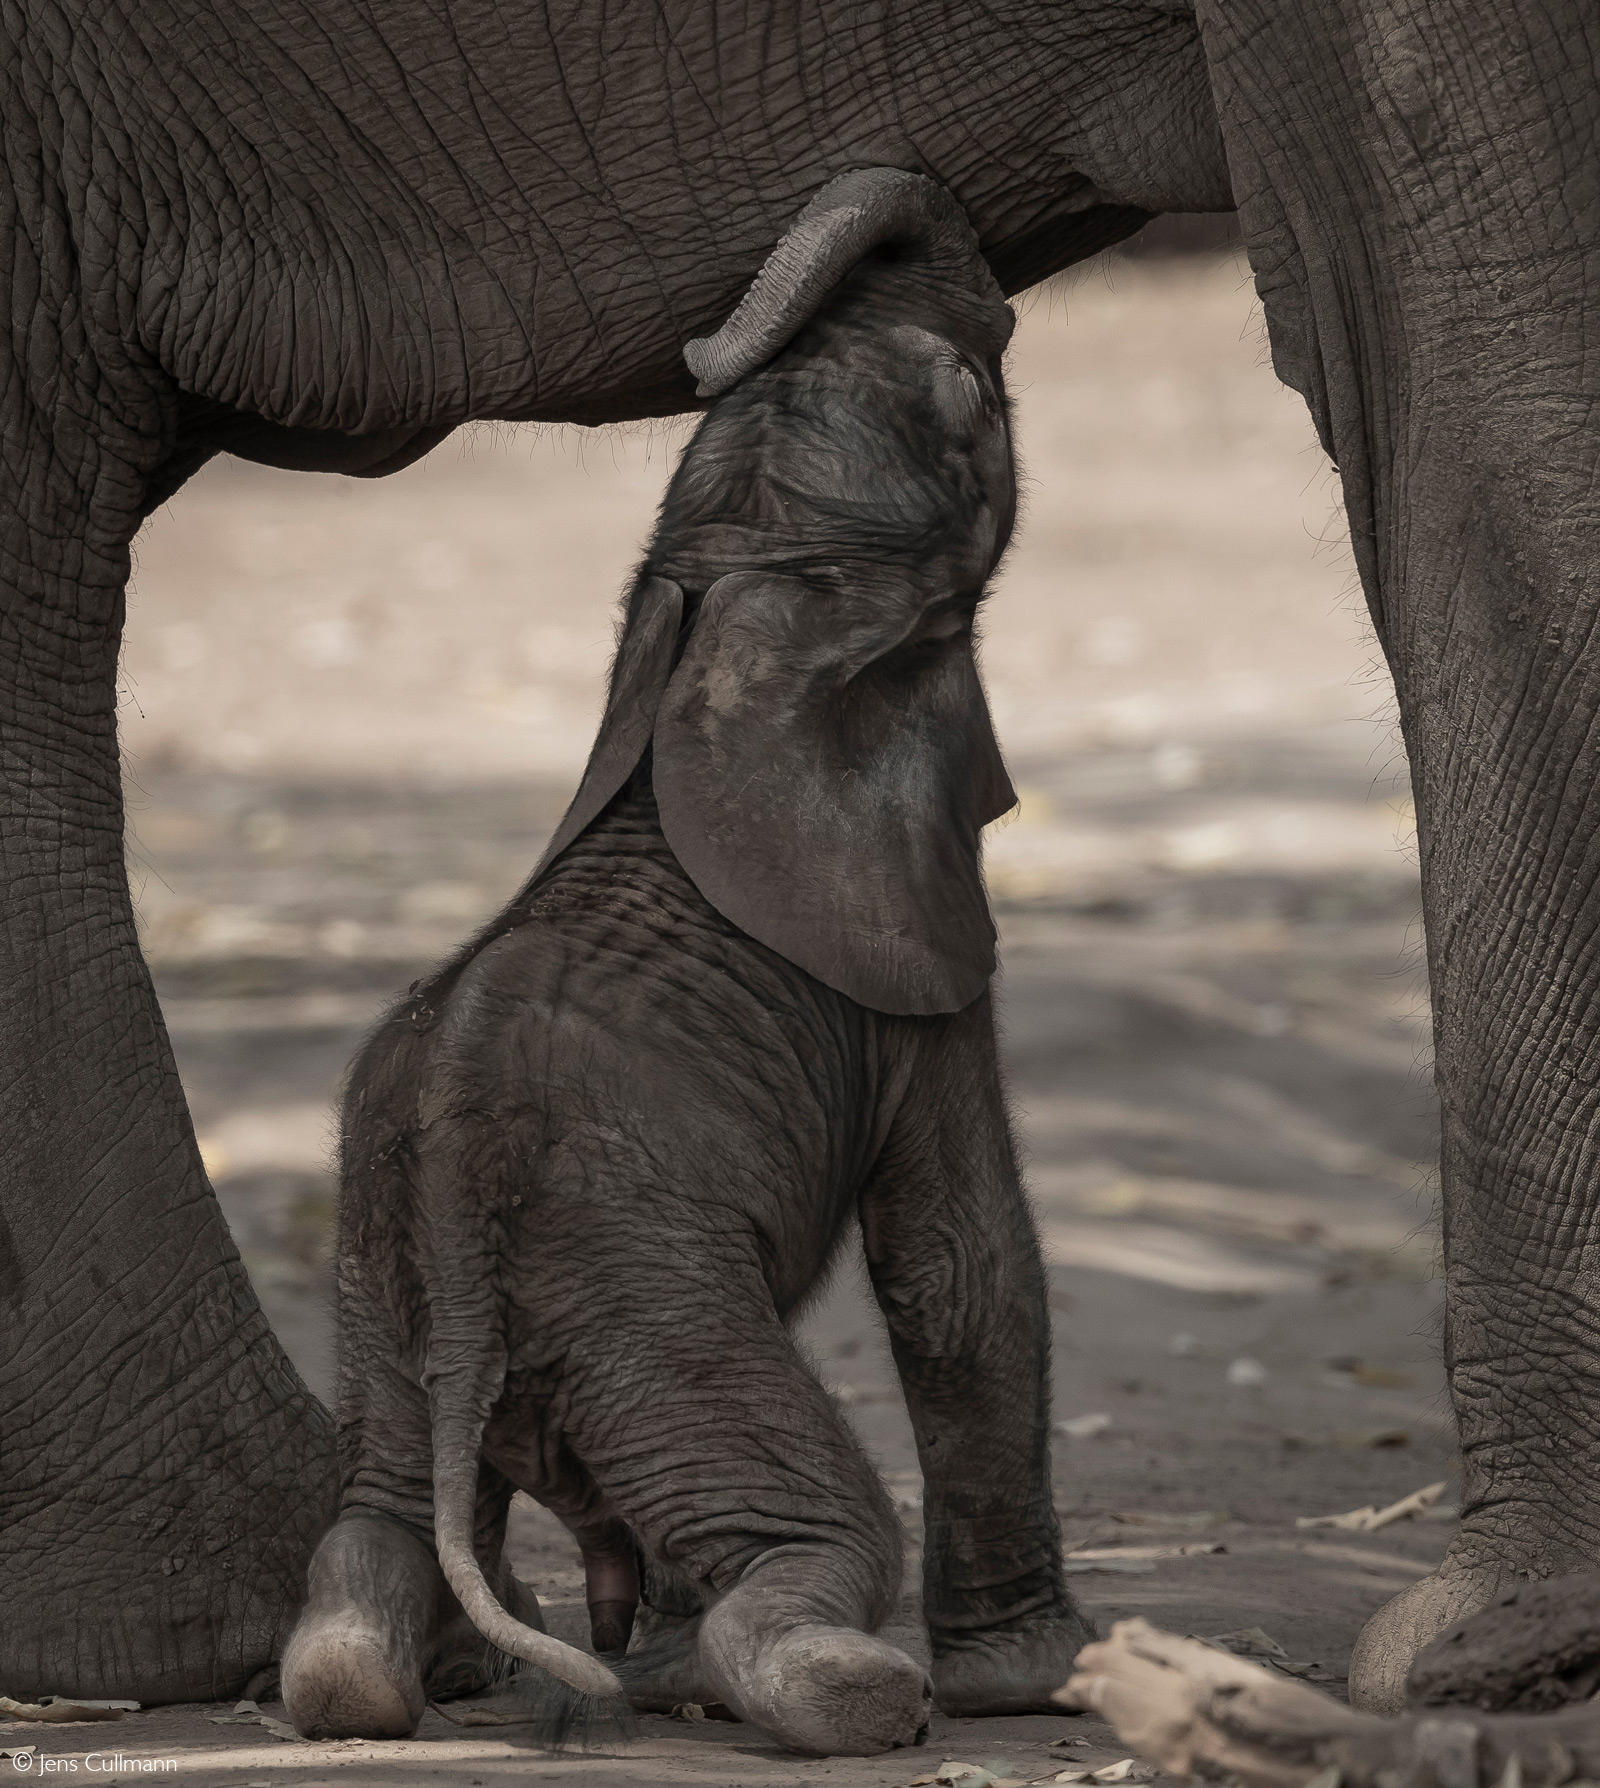 A very young elephant calf attempt to suckle from its mother. Mana Pools National Park, Zimbabwe © Jens Cullmann